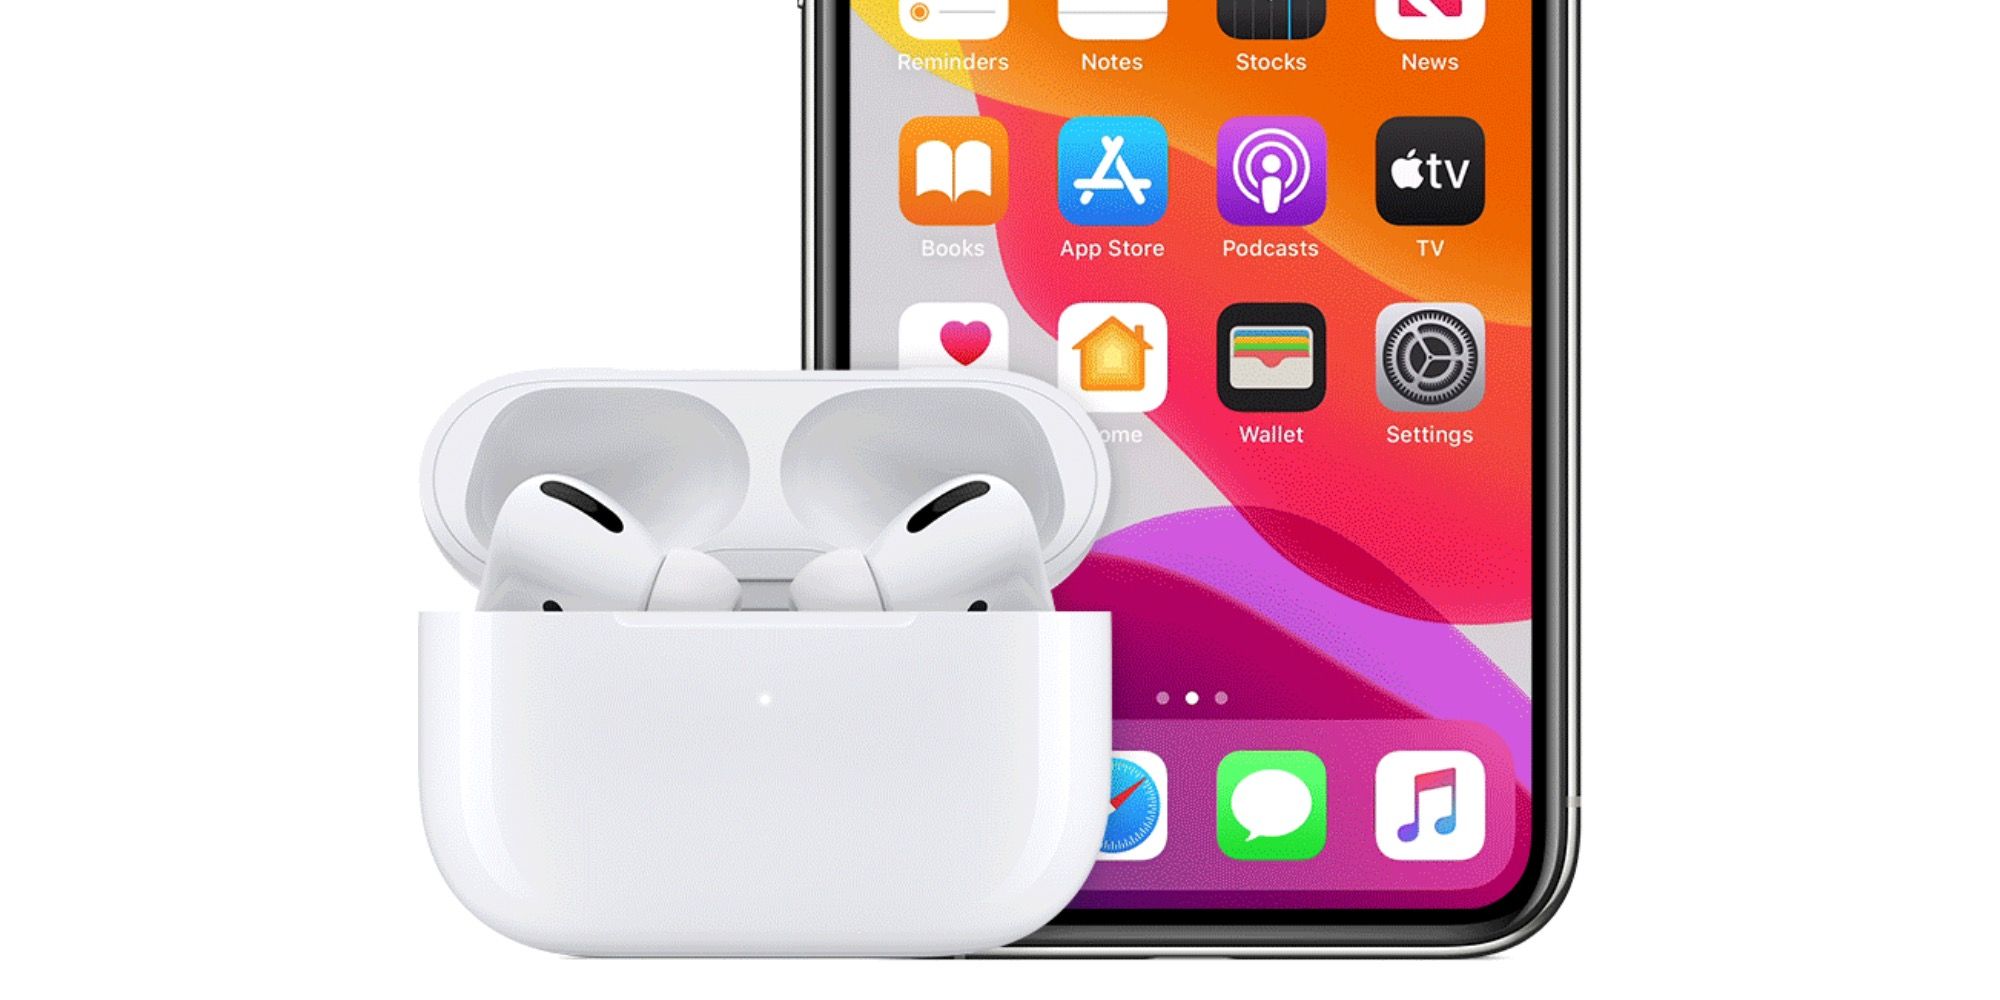 AirPods and iPhone